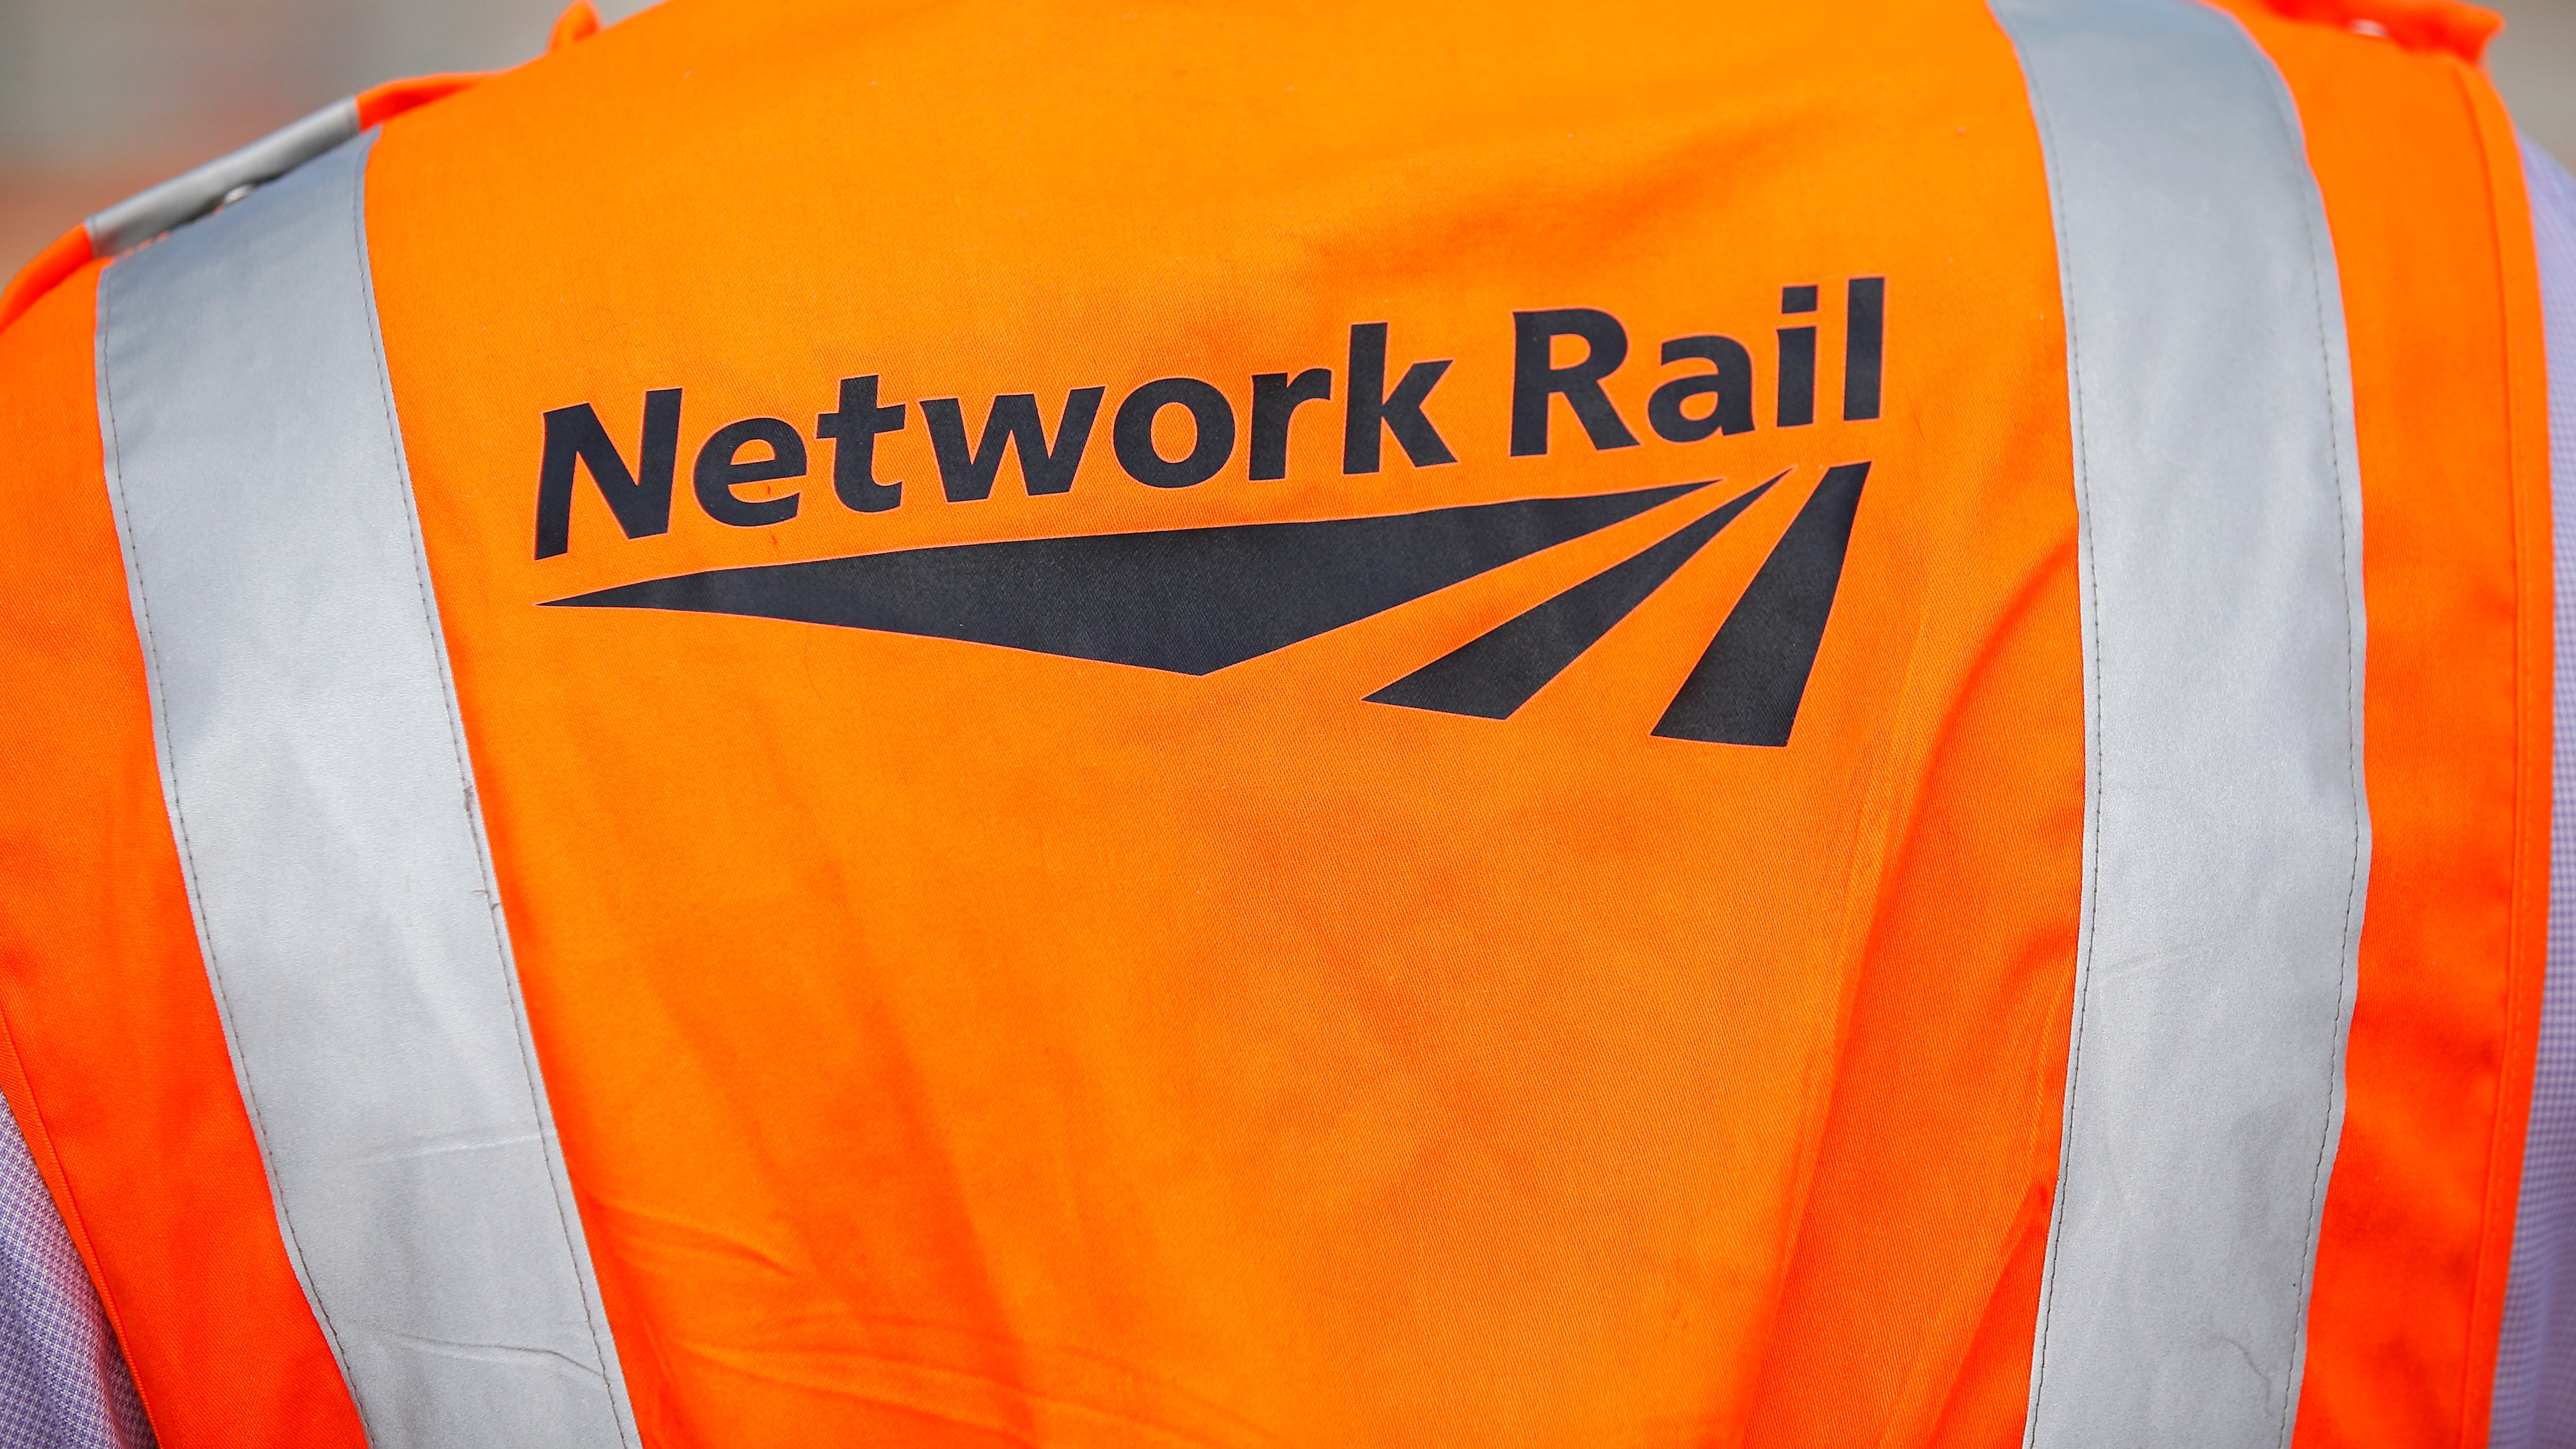 Network Rail has announced it is ramping up spending on protecting the railway from climate change and extreme weather